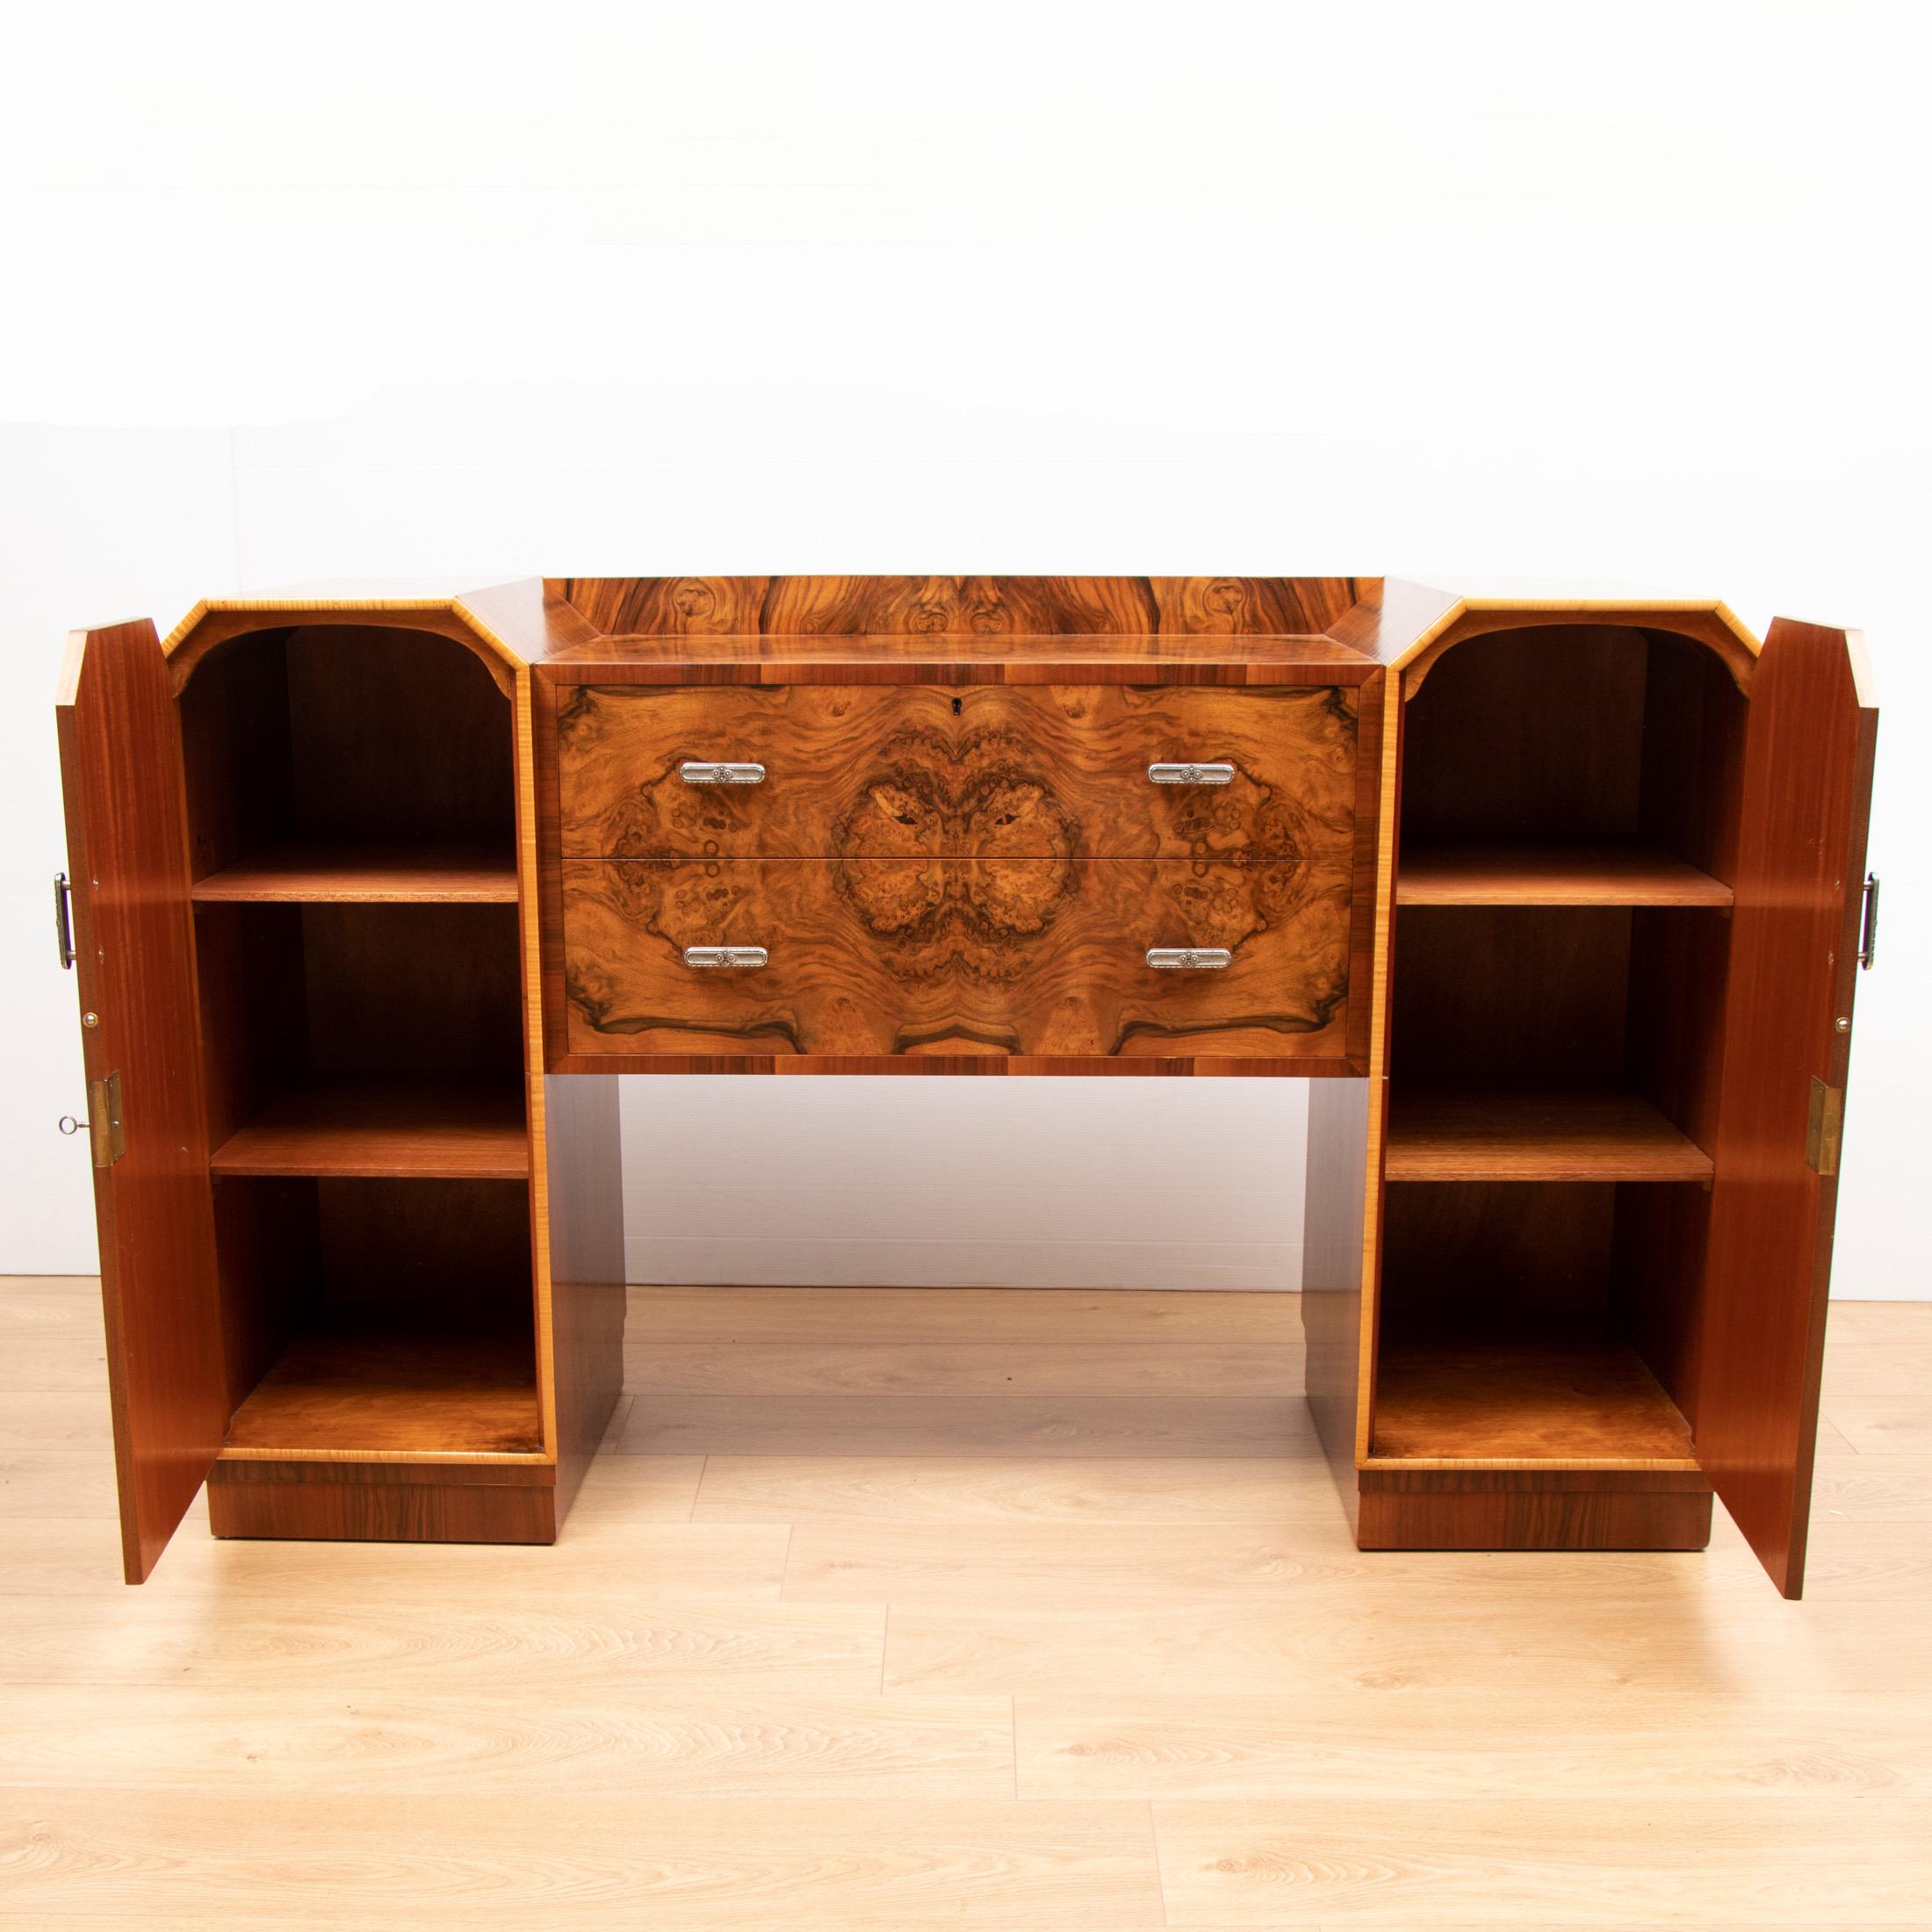 British Art Deco Figured Walnut Sideboard by Warring and Gillows